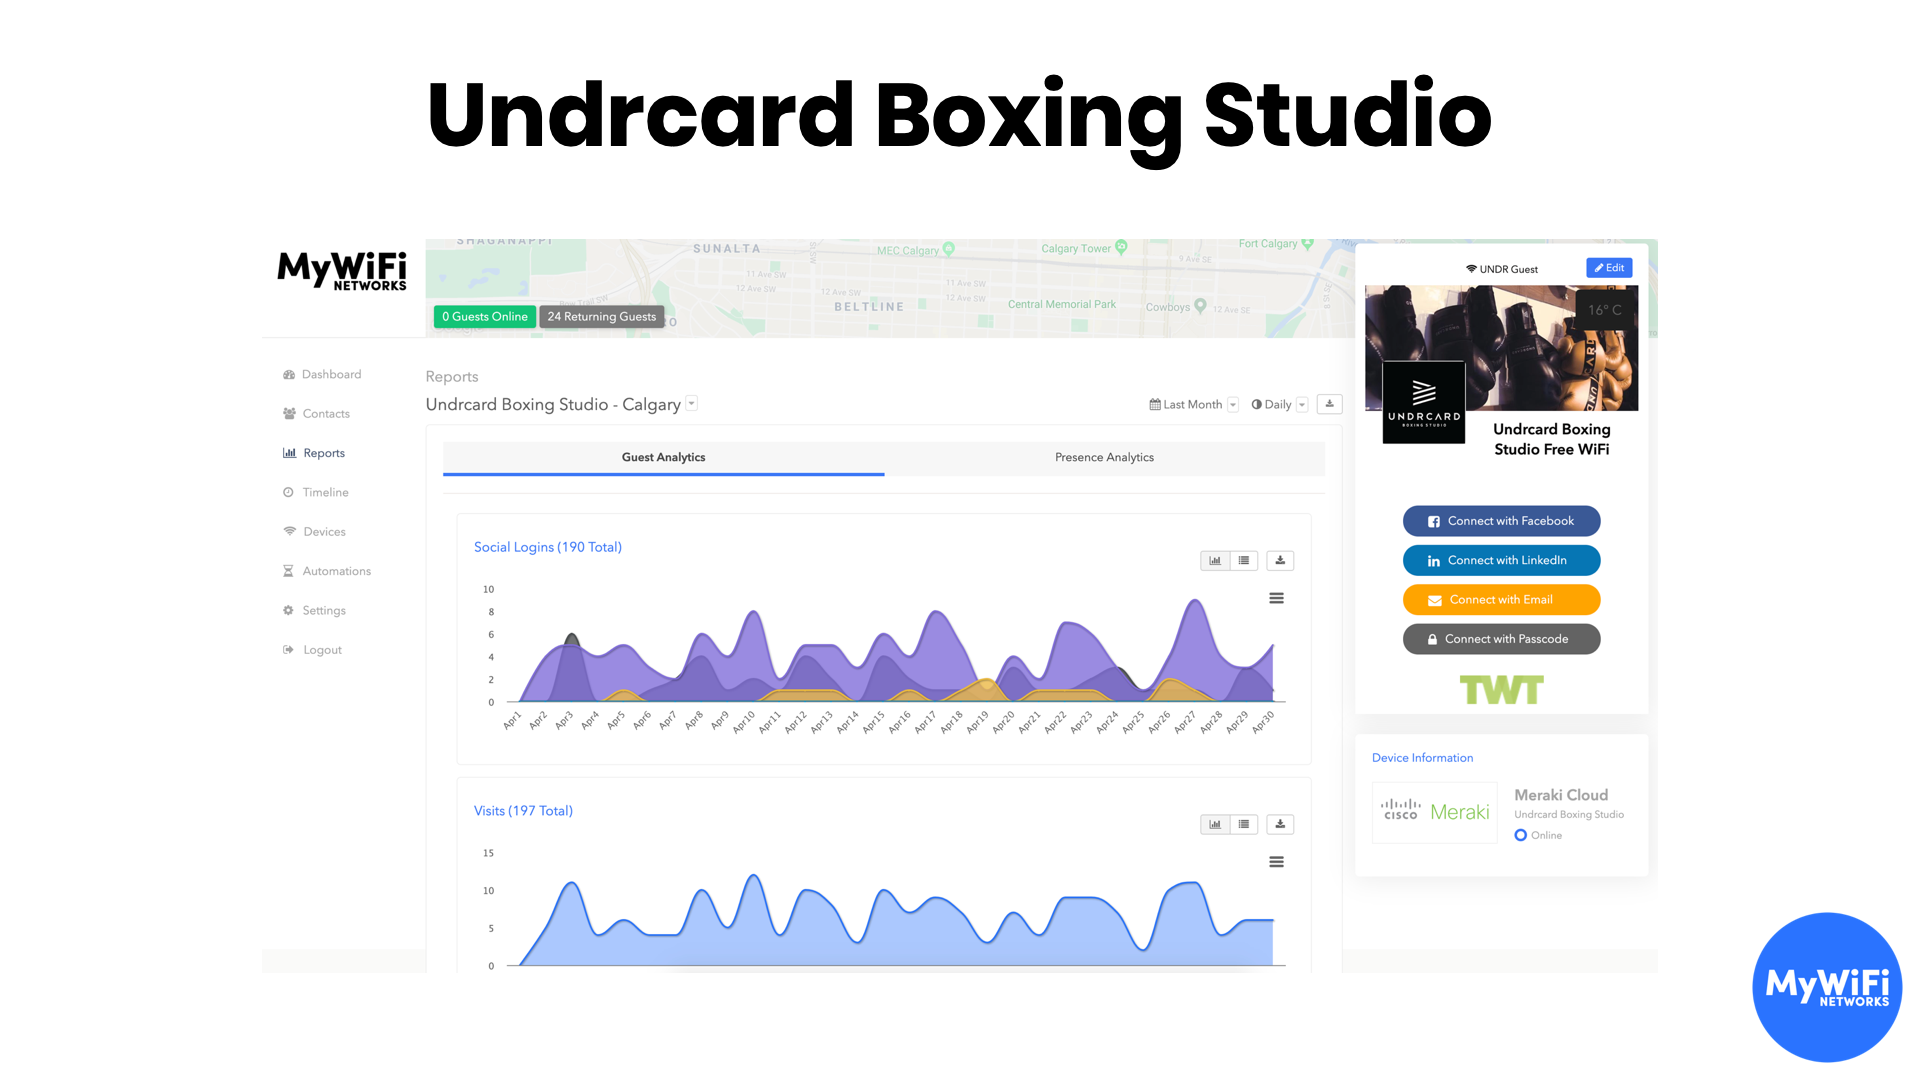 Helping connect clients at a boxing studio to guest WiFi using email login, Facebook or authentication, and a passcode login bypass option for staff and trainers.